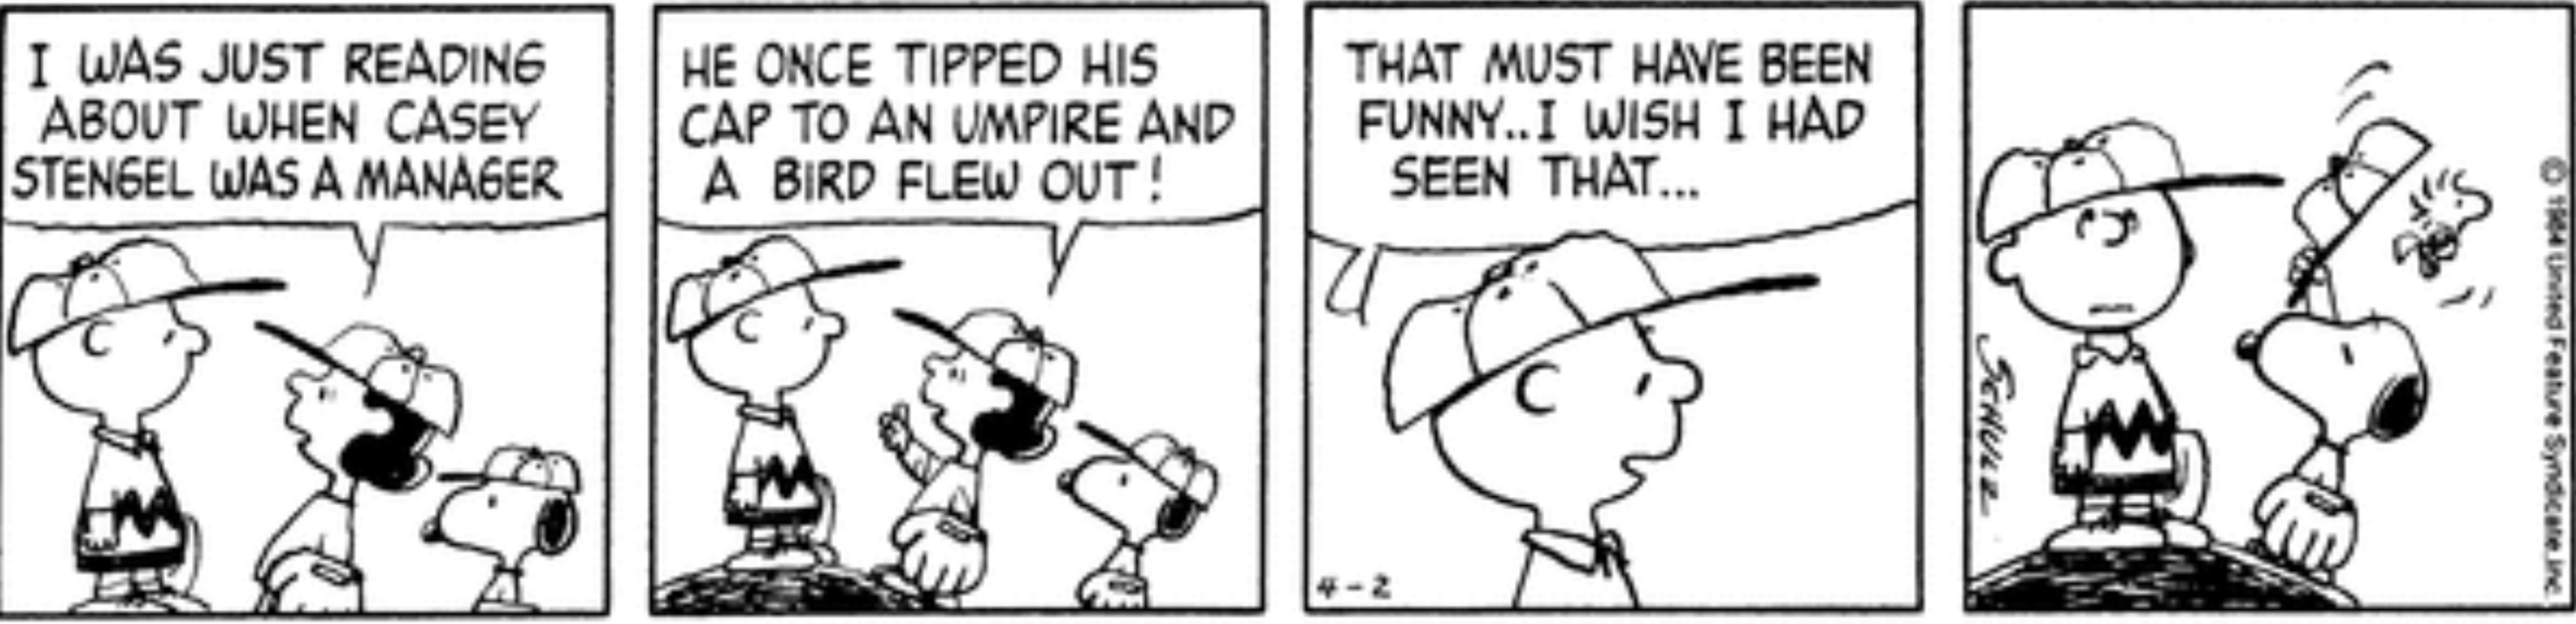 Charlie Brown, Lucy, and Snoopy on the baseball field in Peanuts.